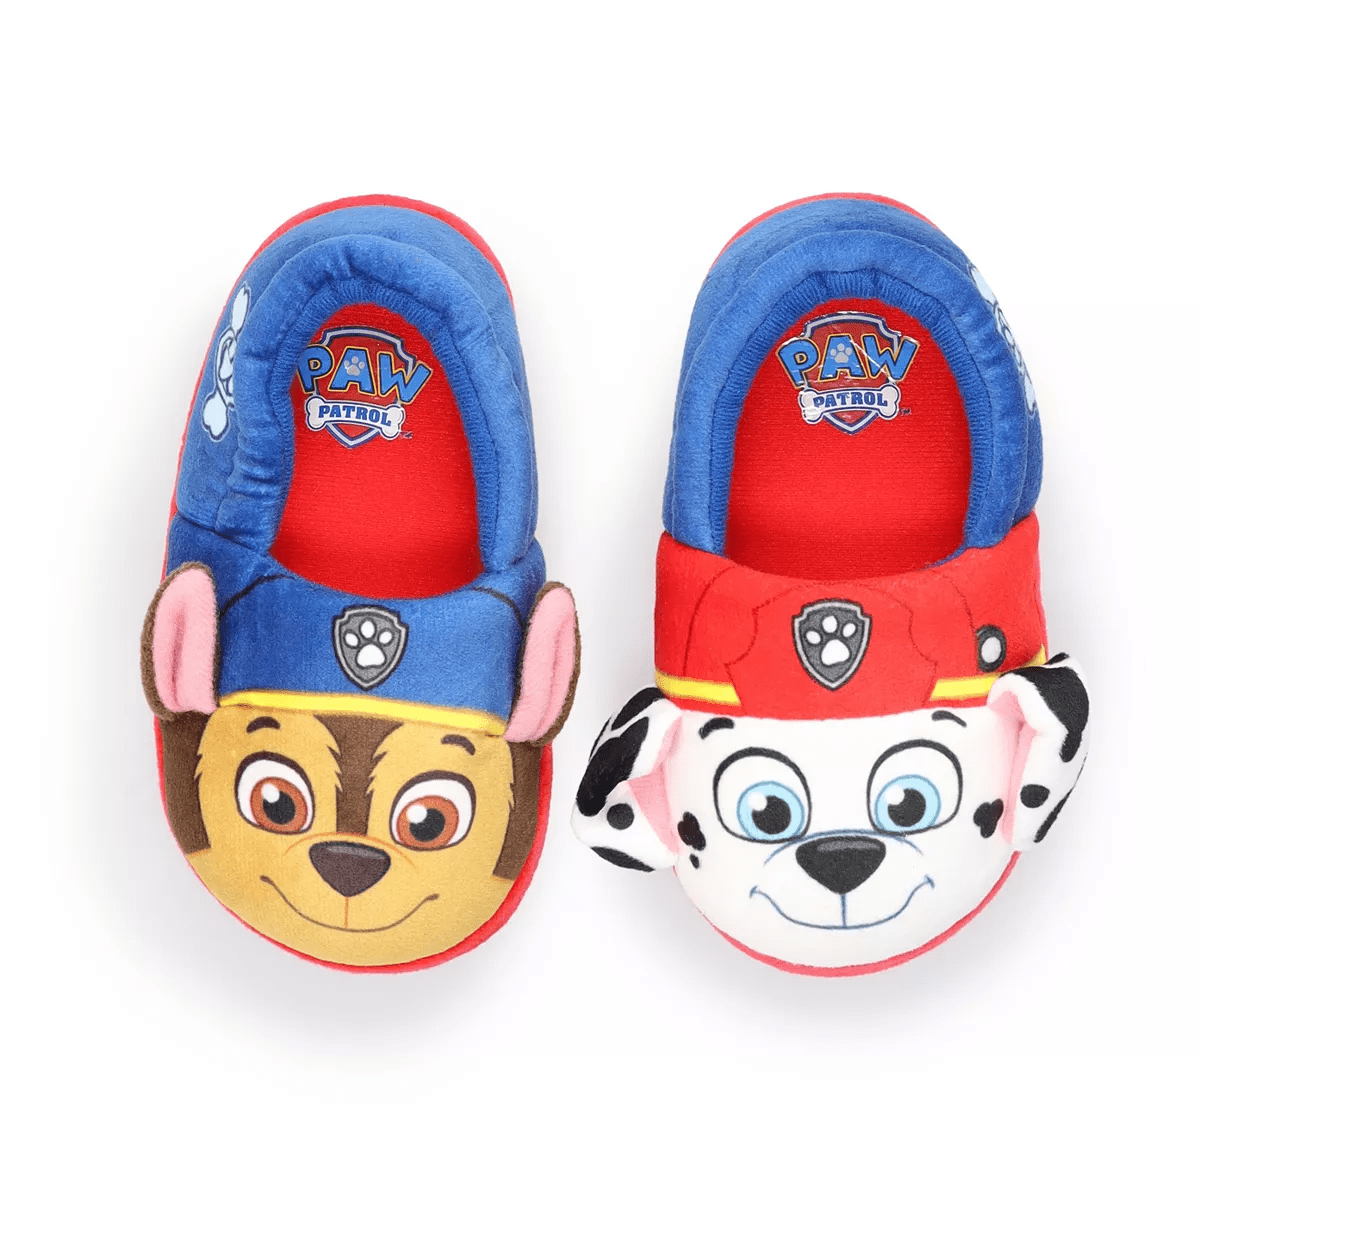 Paw Patrol Rubble 3D Plush Kids Toddlers Slippers Non Slip Sole Size 10.5-12